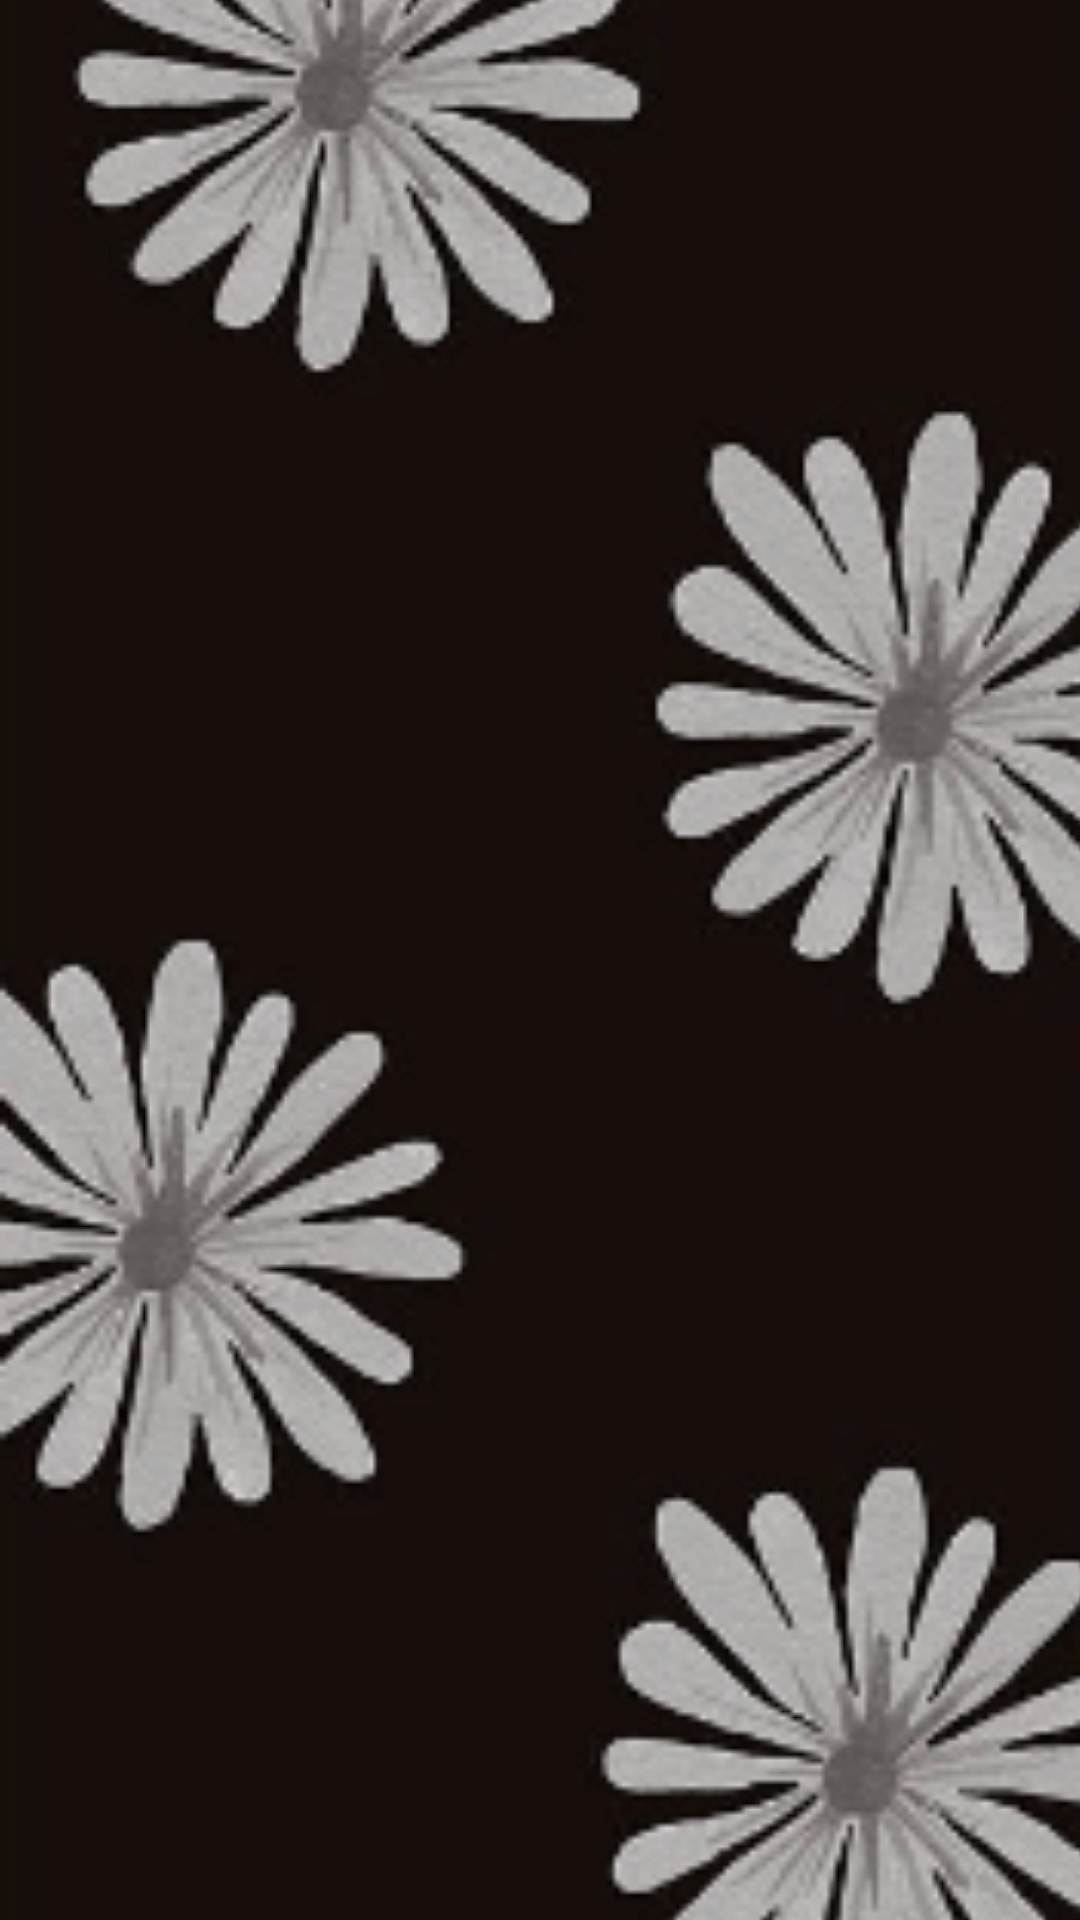 A black and white flower pattern on dark background - Black, iPhone